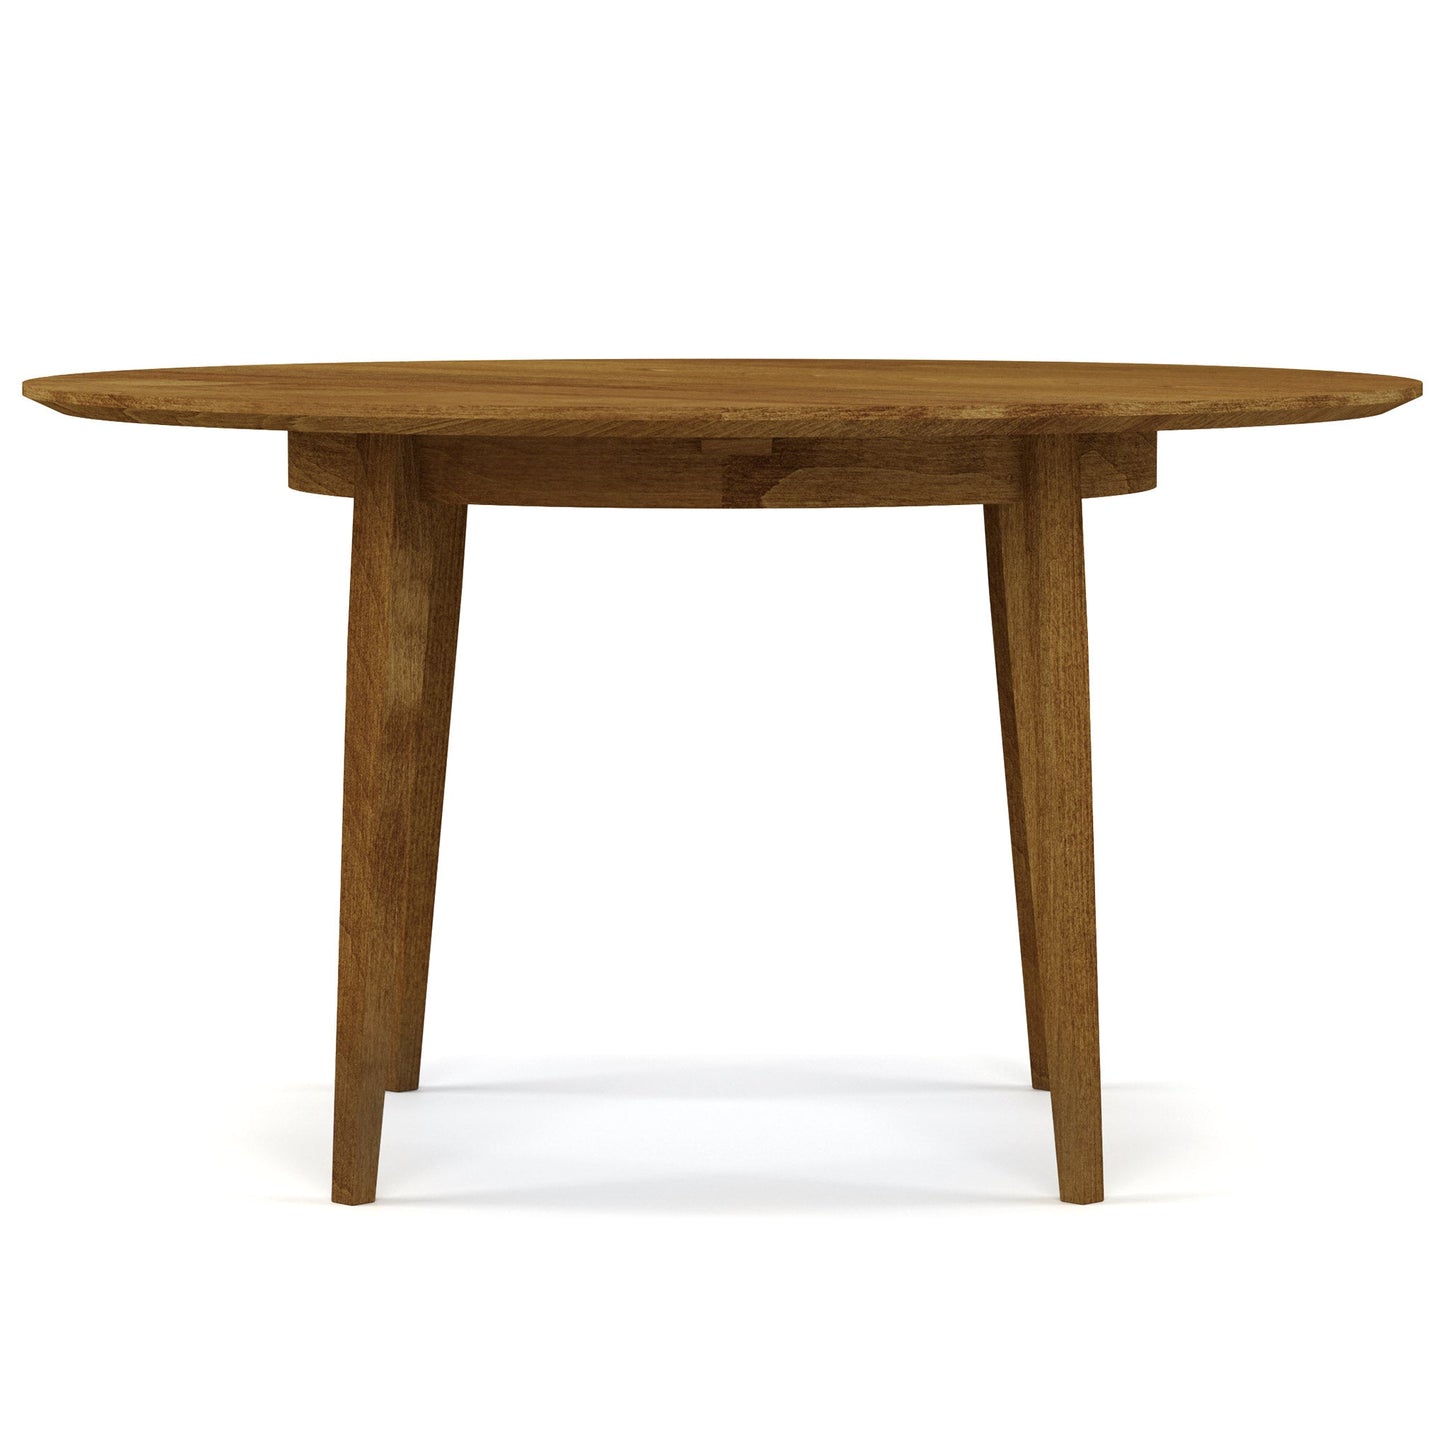 Gable Road 54-inch Round Dining Table